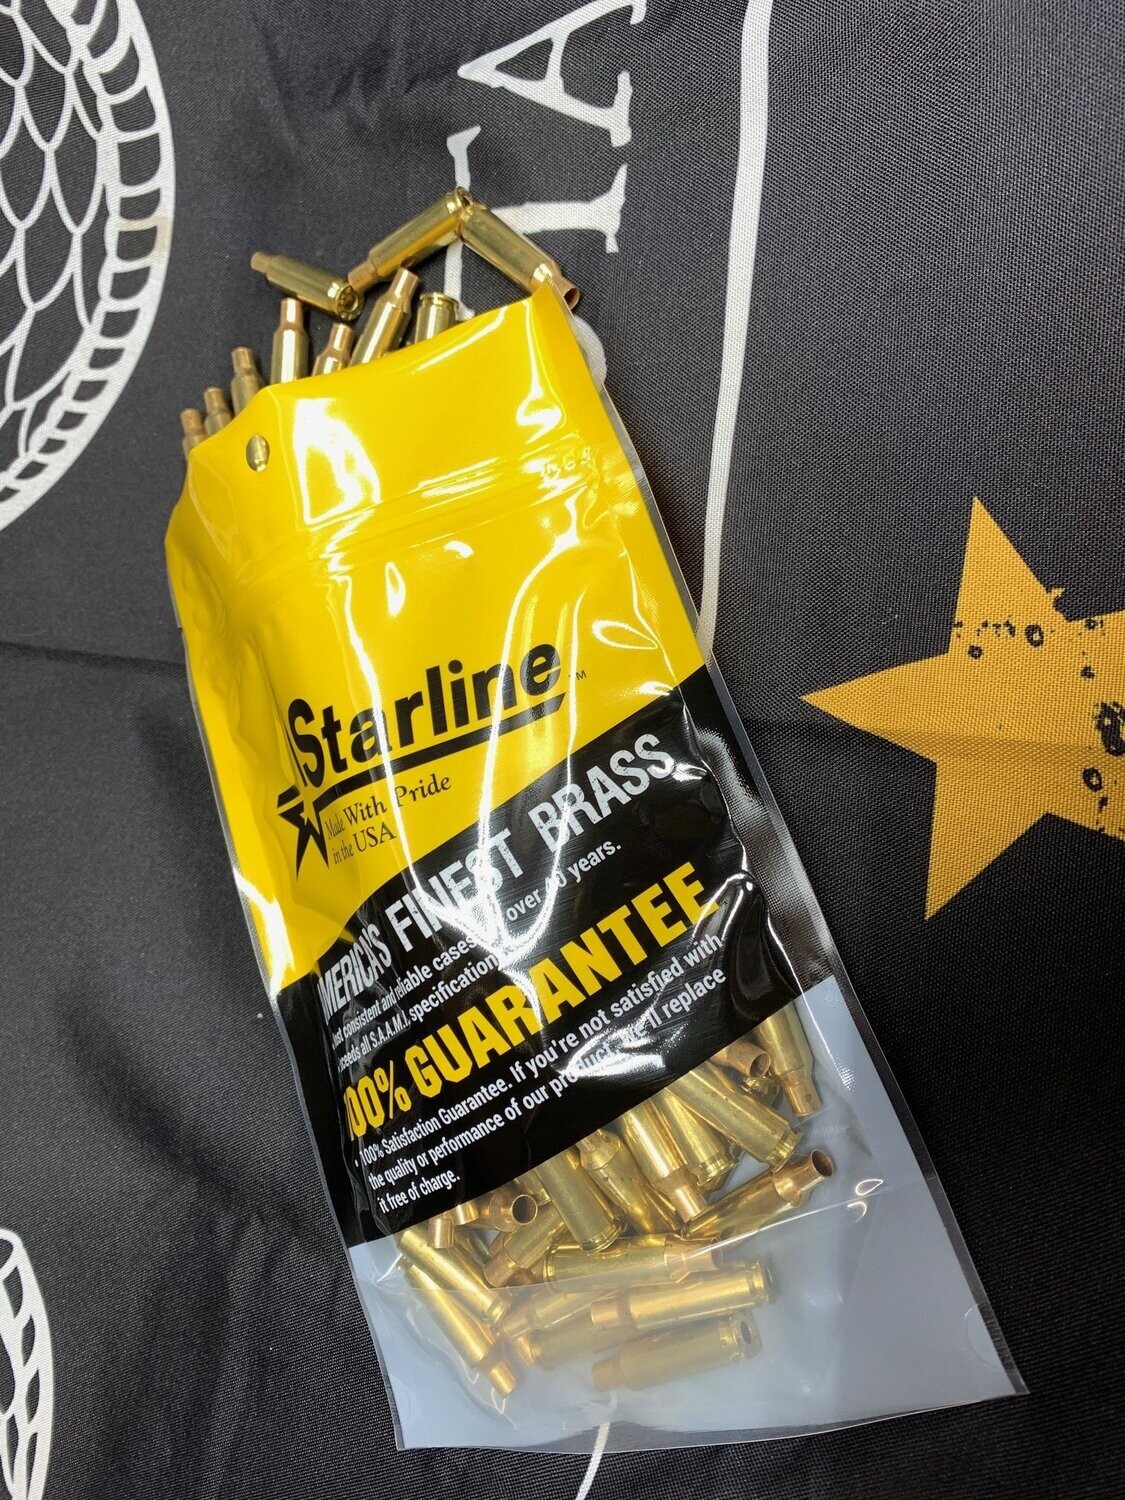 .224 Valkyrie New Starline Brass (Limit 1000 Cases per Household)